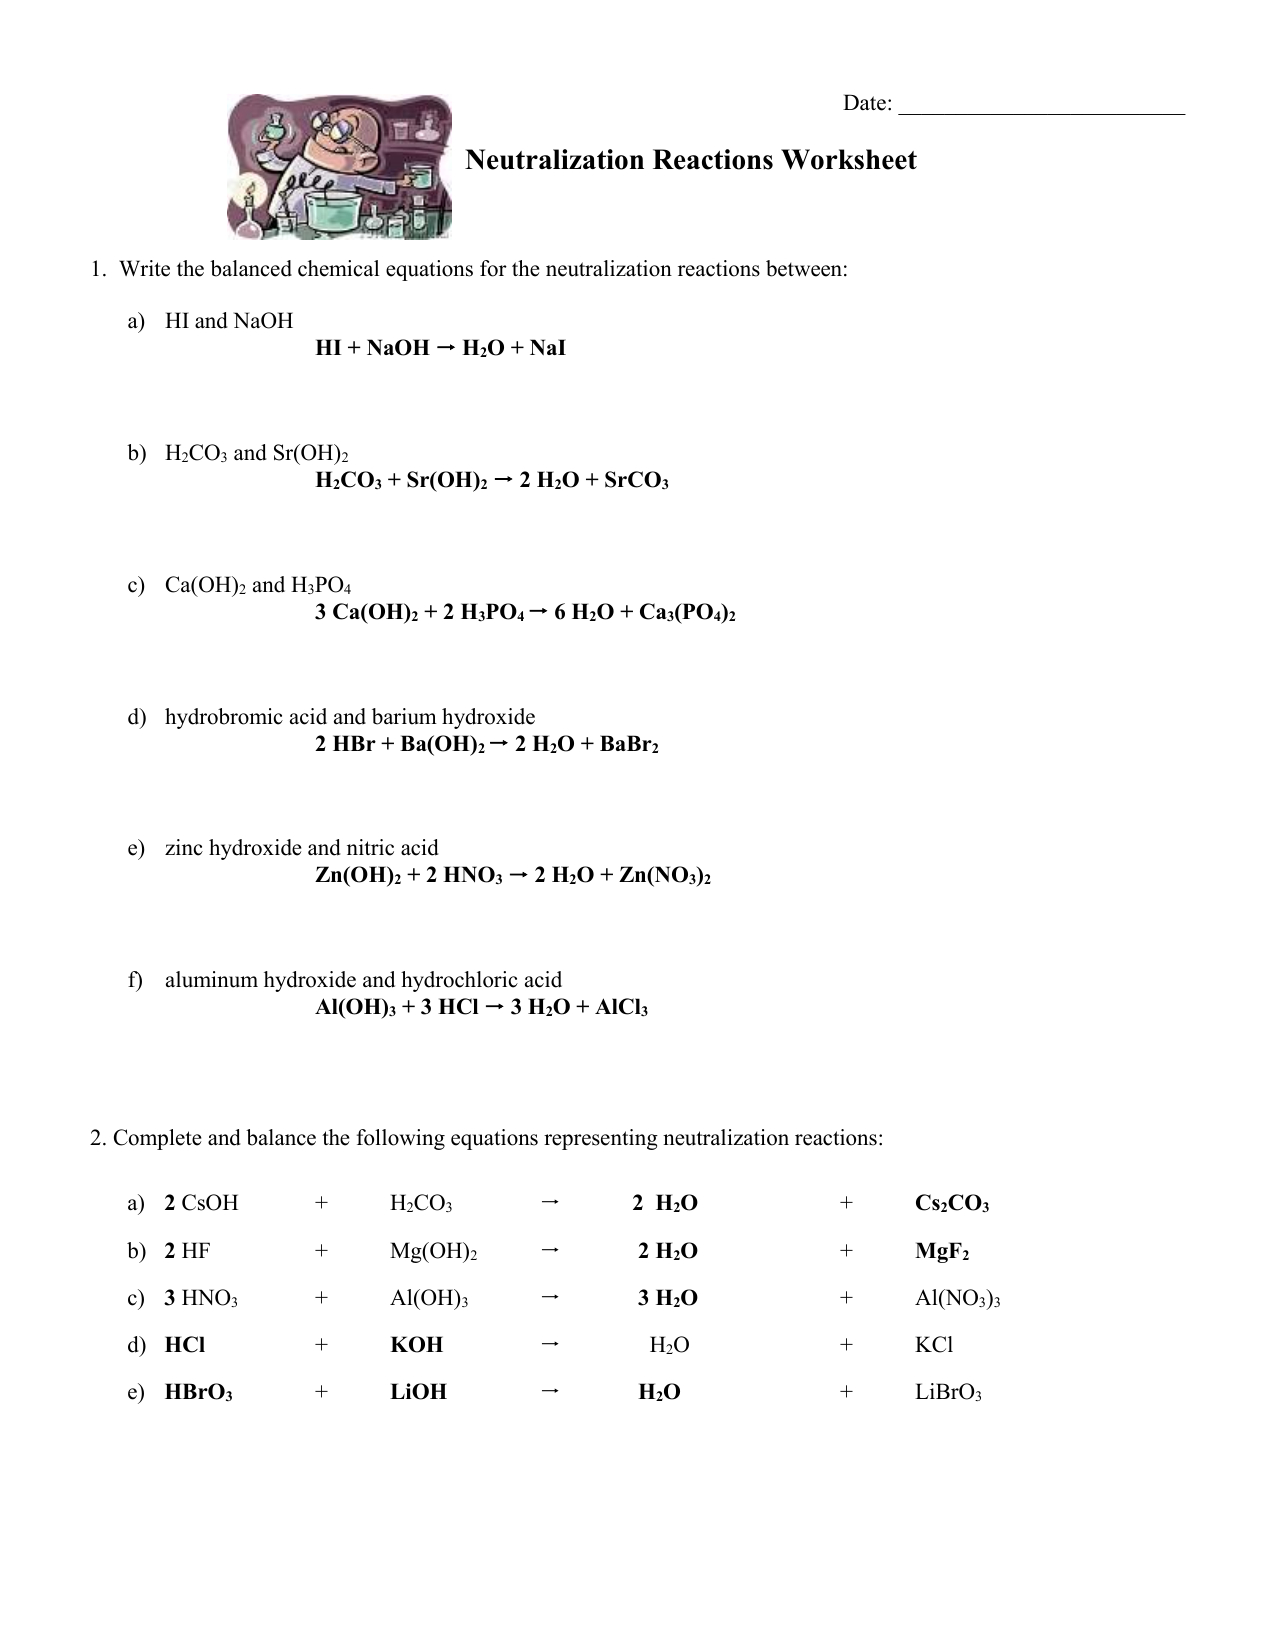 03 Neutralization Reactions Worksheet Key With Regard To Neutralization Reactions Worksheet